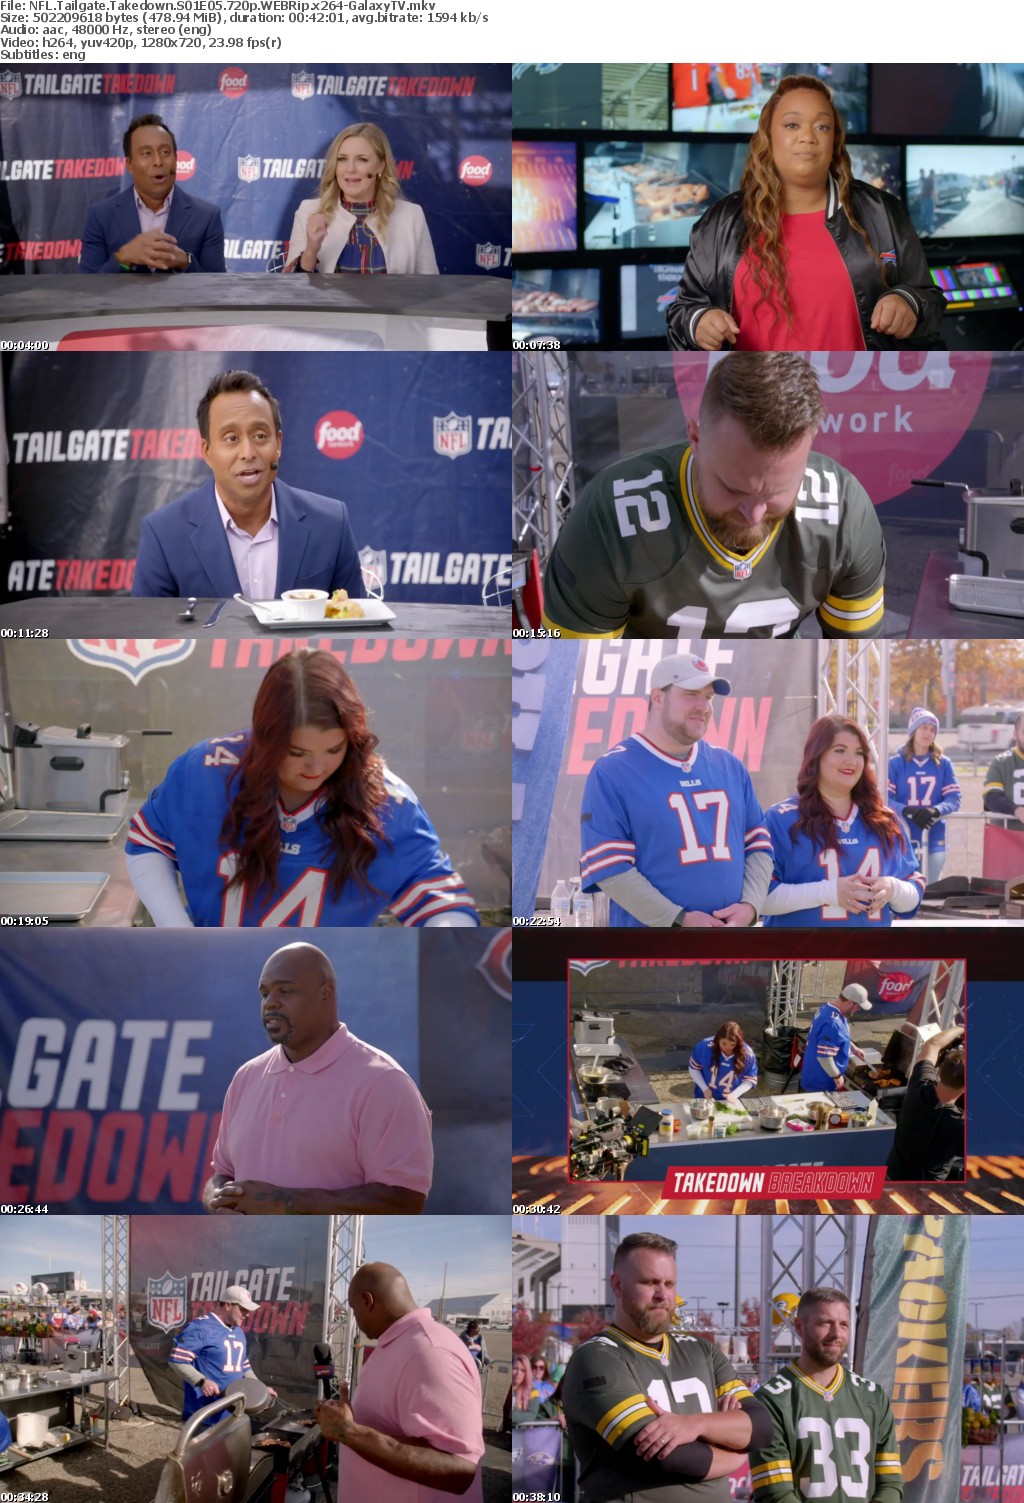 NFL Tailgate Takedown S01 COMPLETE 720p WEBRip x264-GalaxyTV